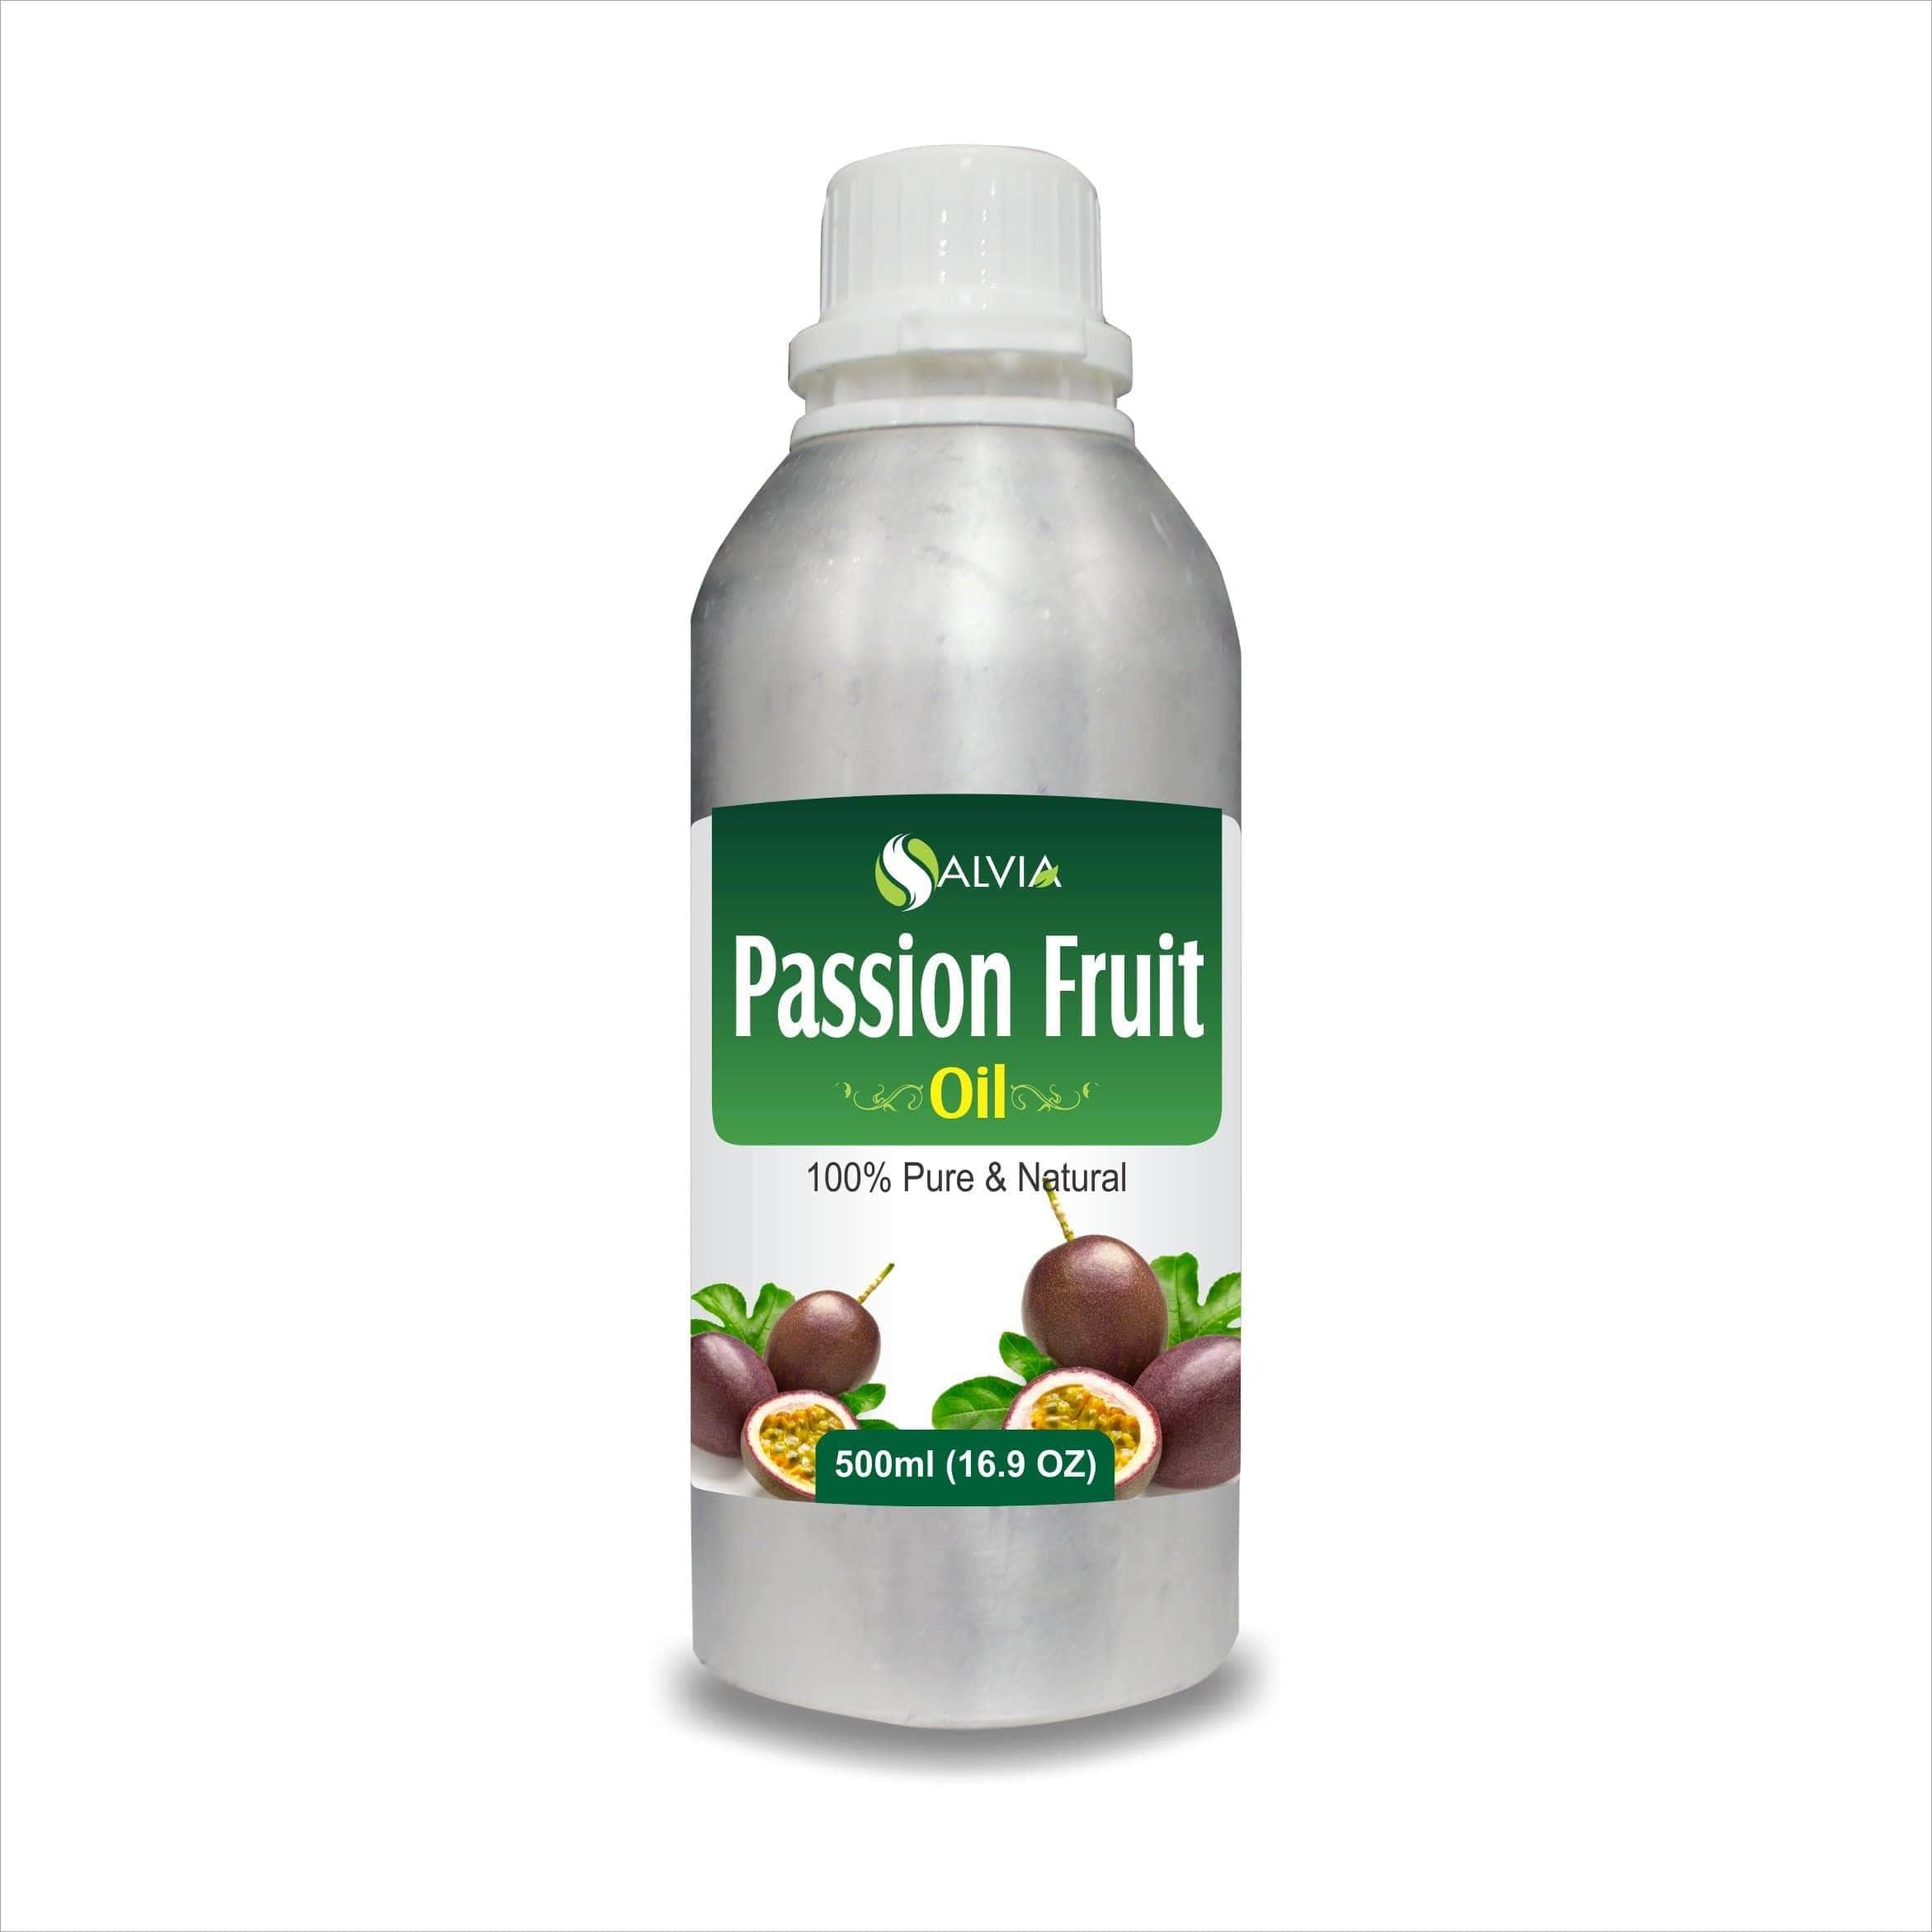 Passion Fruit  oil uses